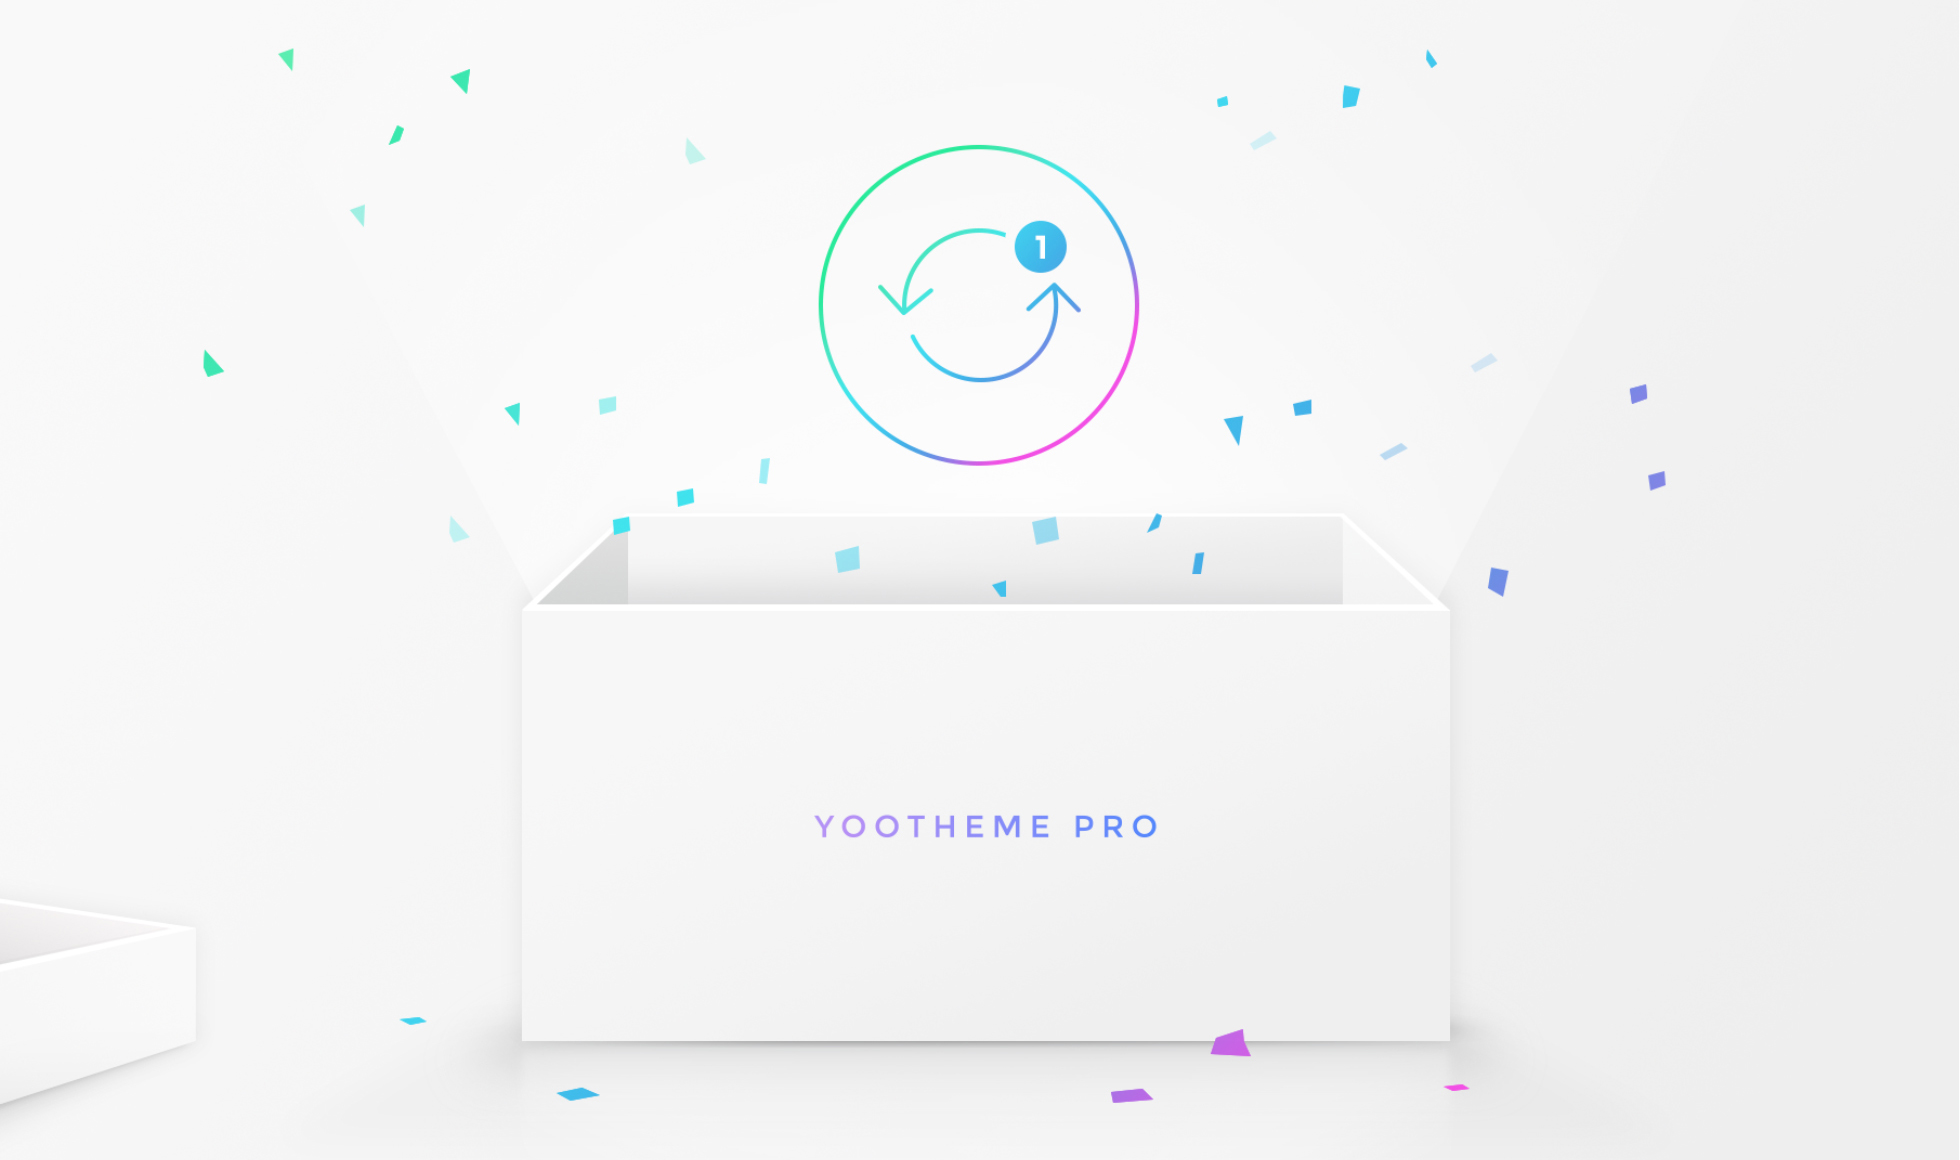 YOOtheme Pro 1-Click Updates and easy customizations